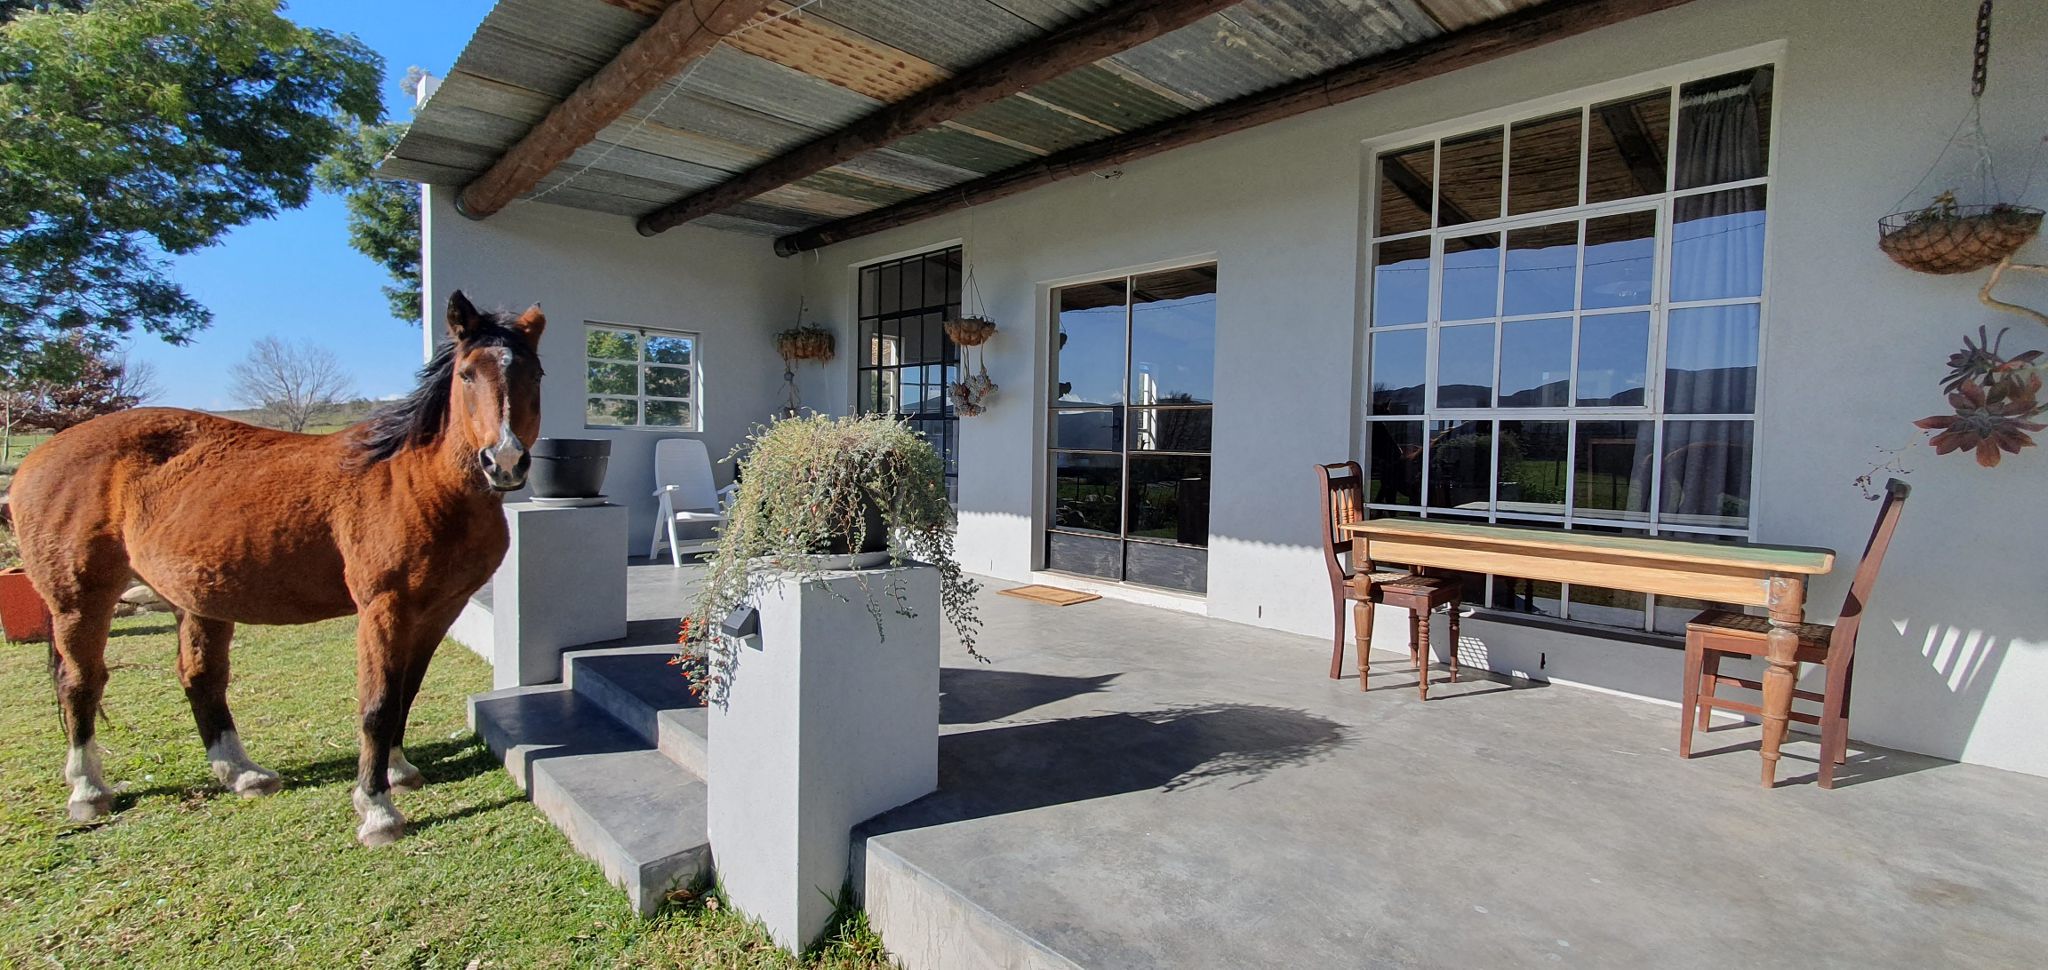 Zandrivier Working Farm Seweweekspoort Western Cape South Africa House, Building, Architecture